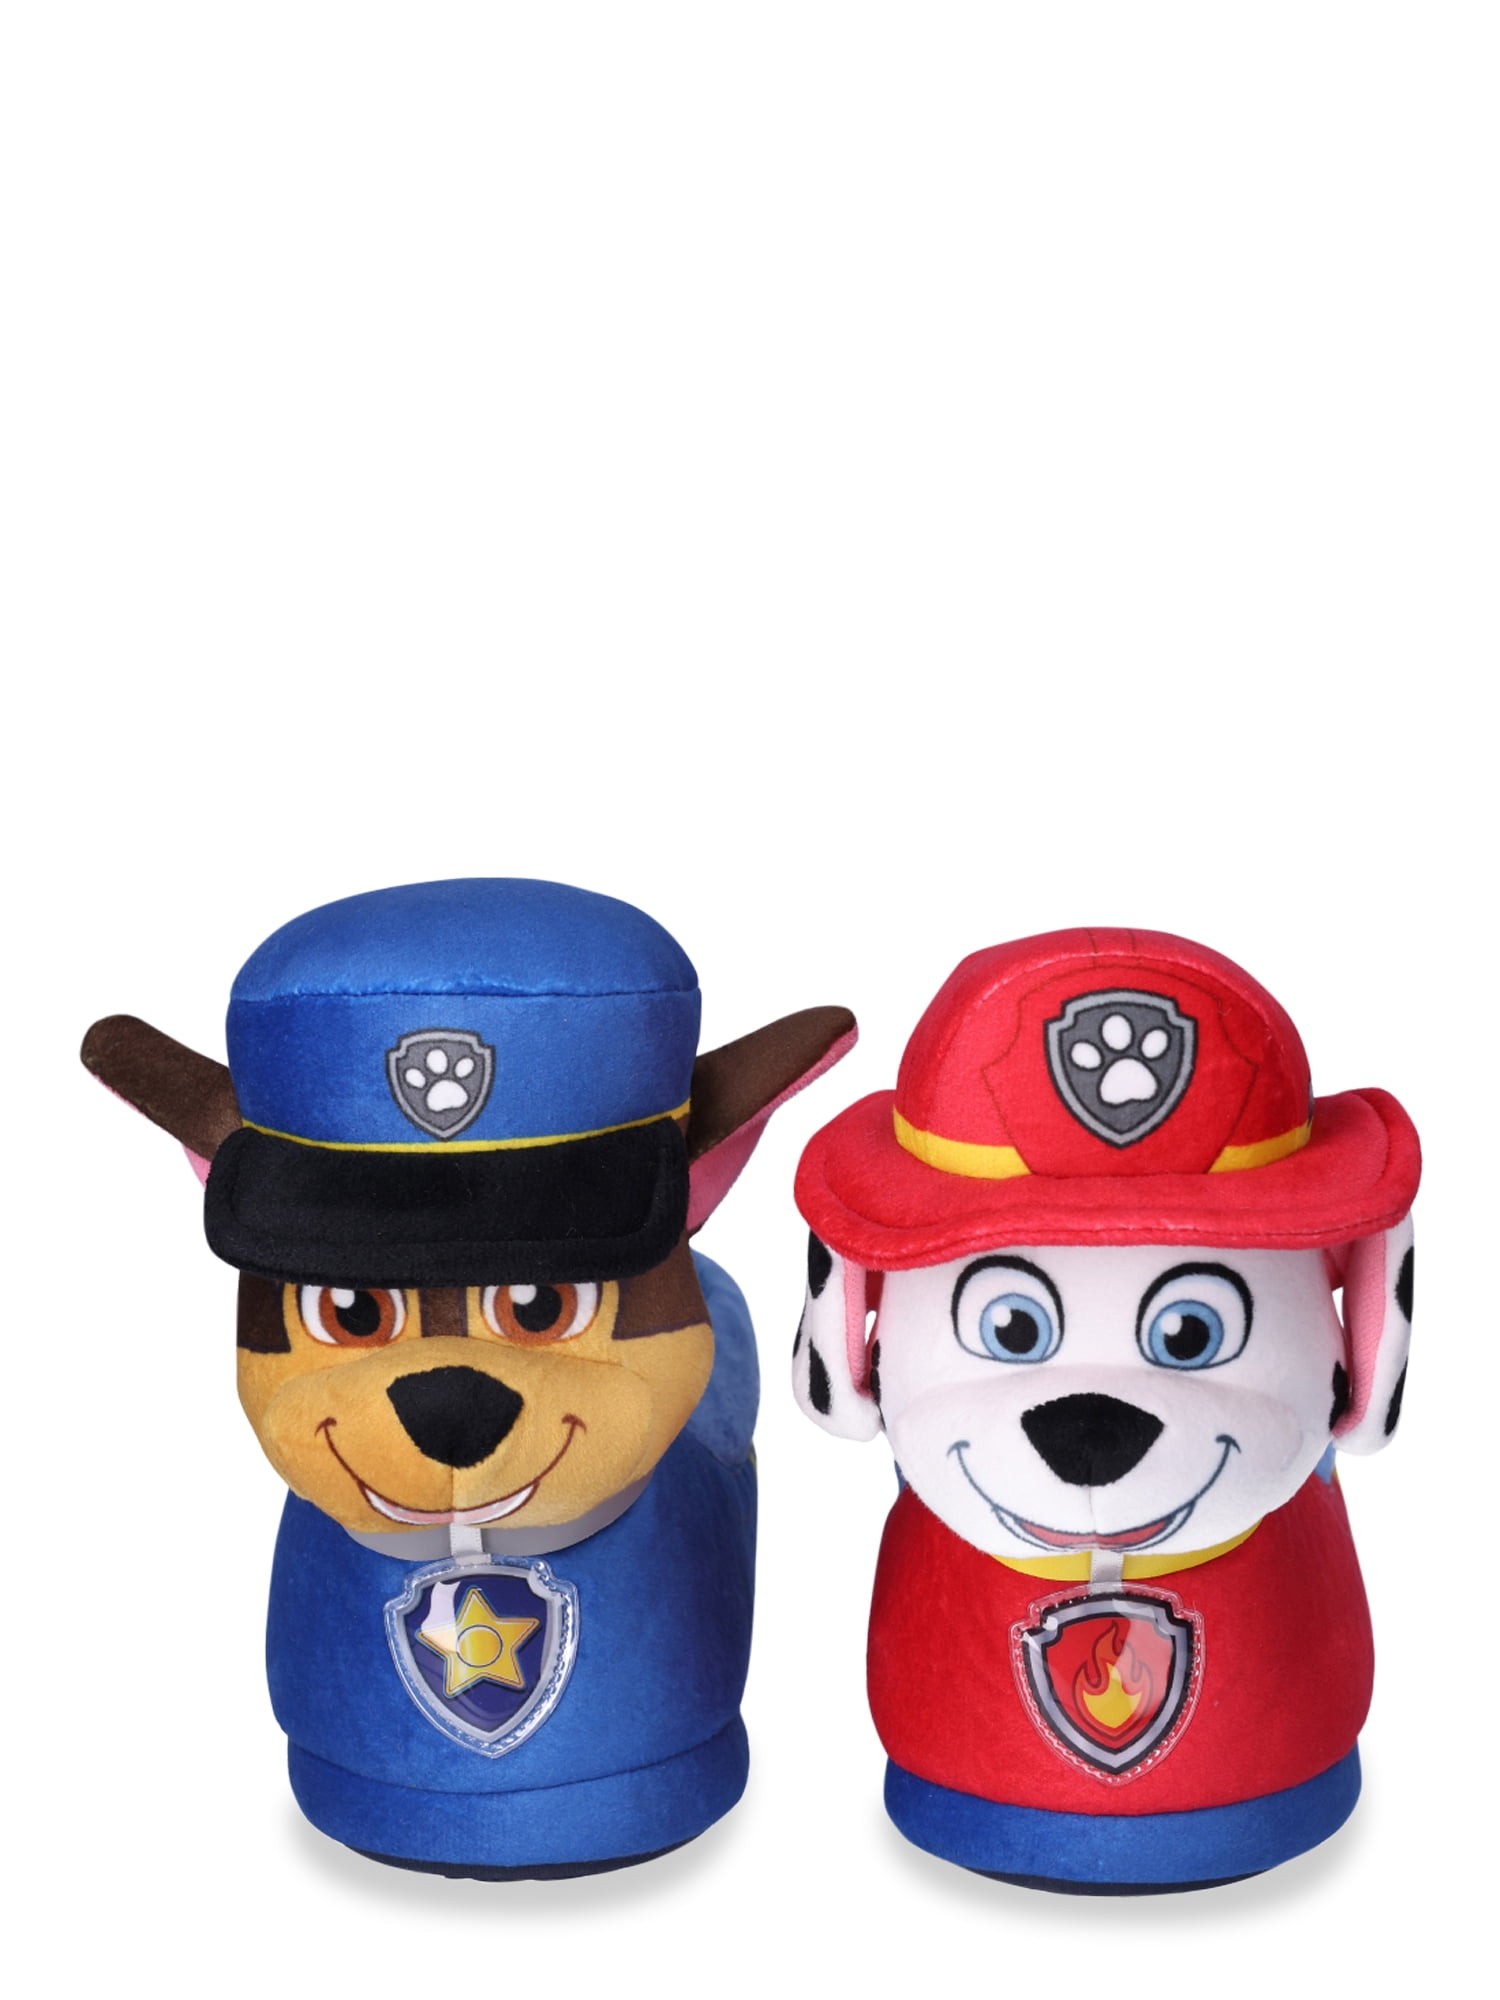 Nickelodeon Paw Patrol Spring & Summer Fun Plastic Bucket Set with Sand,  Chalk, Water, and Novelty Toys, for Ages 3+